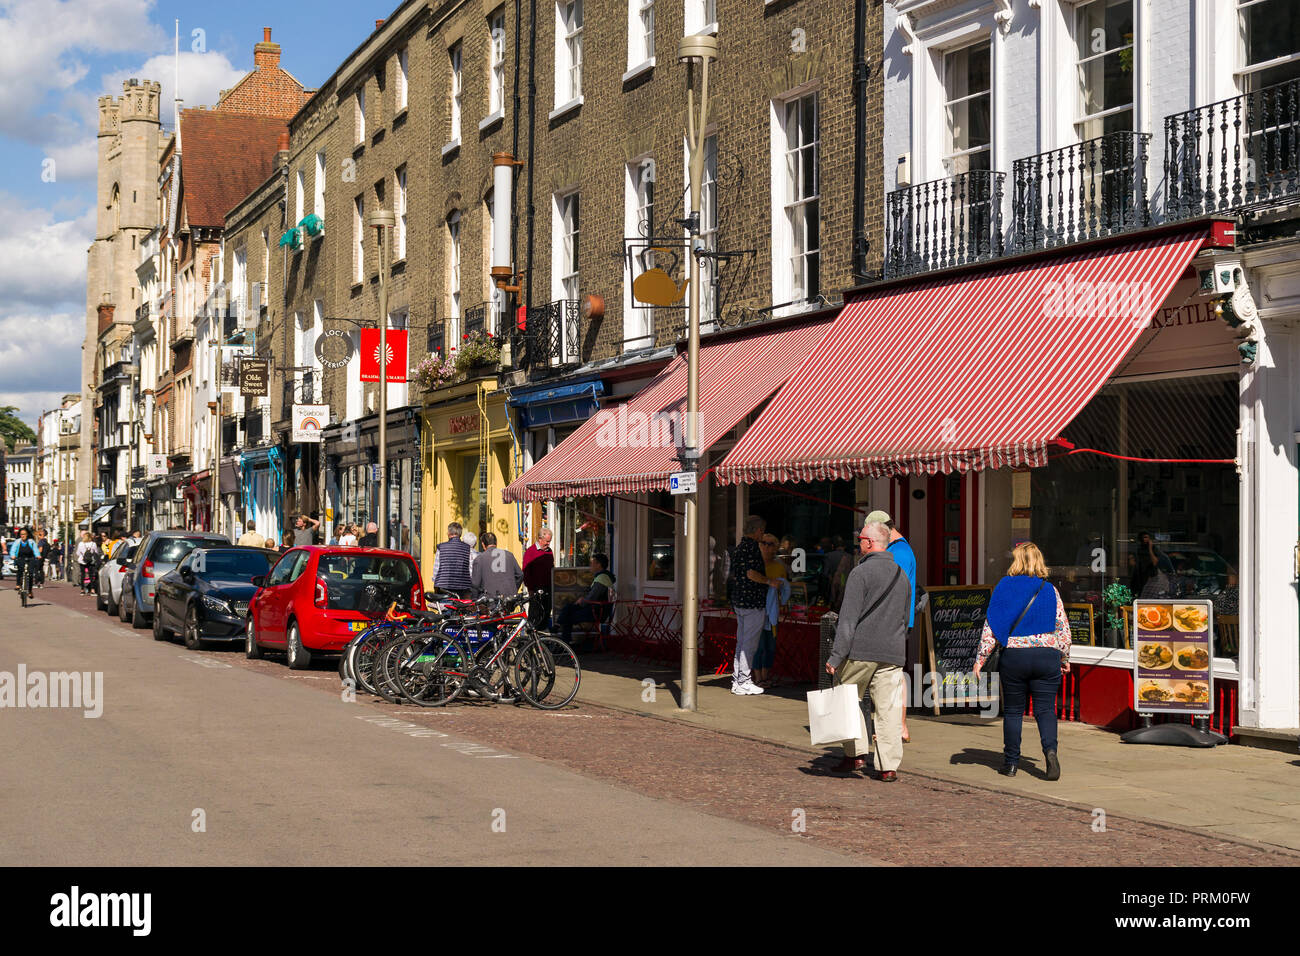 View of Kings Parade with shops, buildings and people walking past on a sunny Summer day, Cambridge, UK Stock Photo